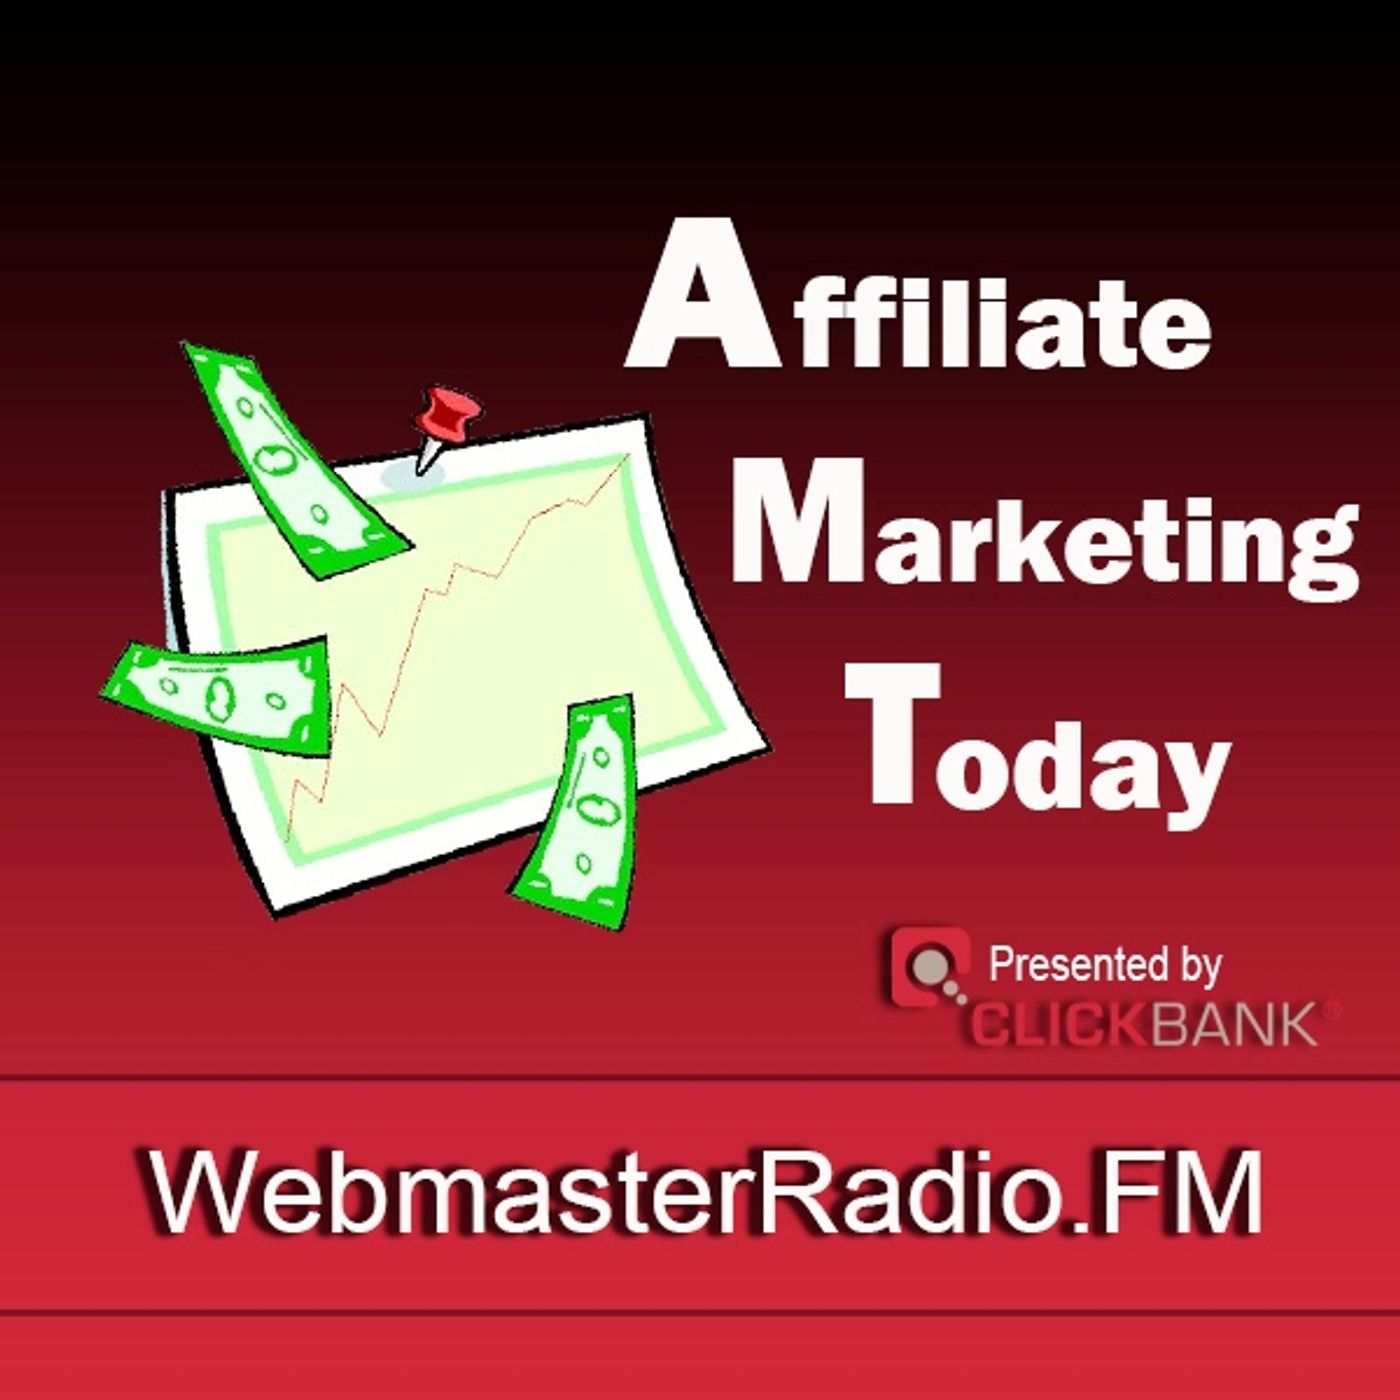 Crowdsourcing for Affiliate Marketing